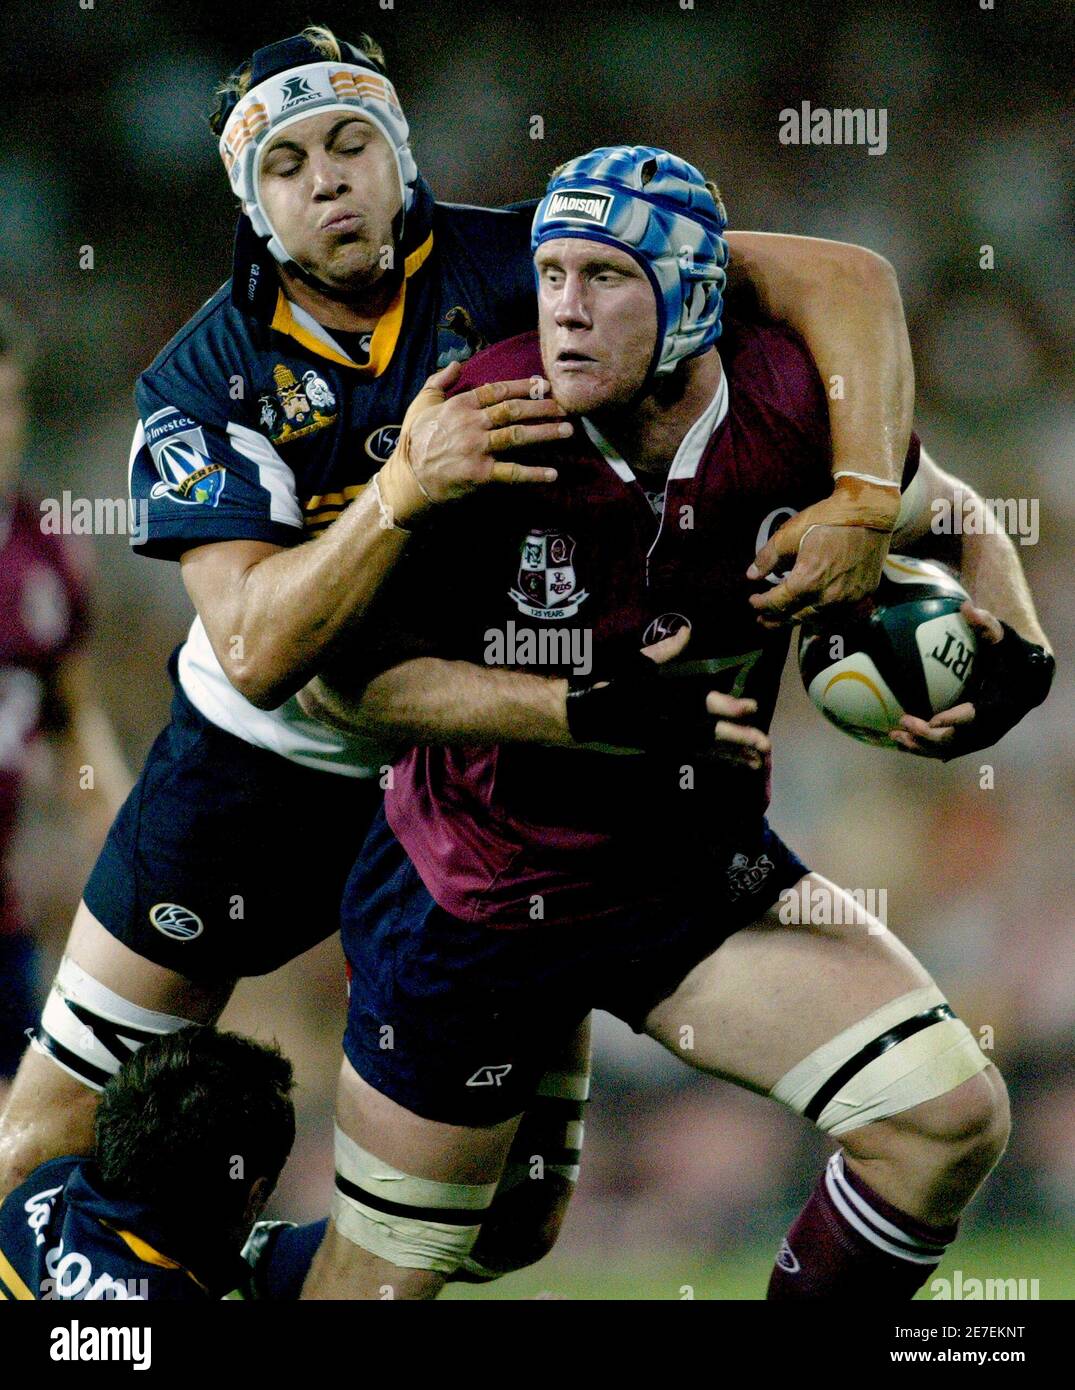 Reds captain John Roe is tackled by Brumbies' Stephen Hioles during their  Super 14 rugby union match in Brisbane February 17, 2007. REUTERS/Greg  White (AUSTRALIA Stock Photo - Alamy